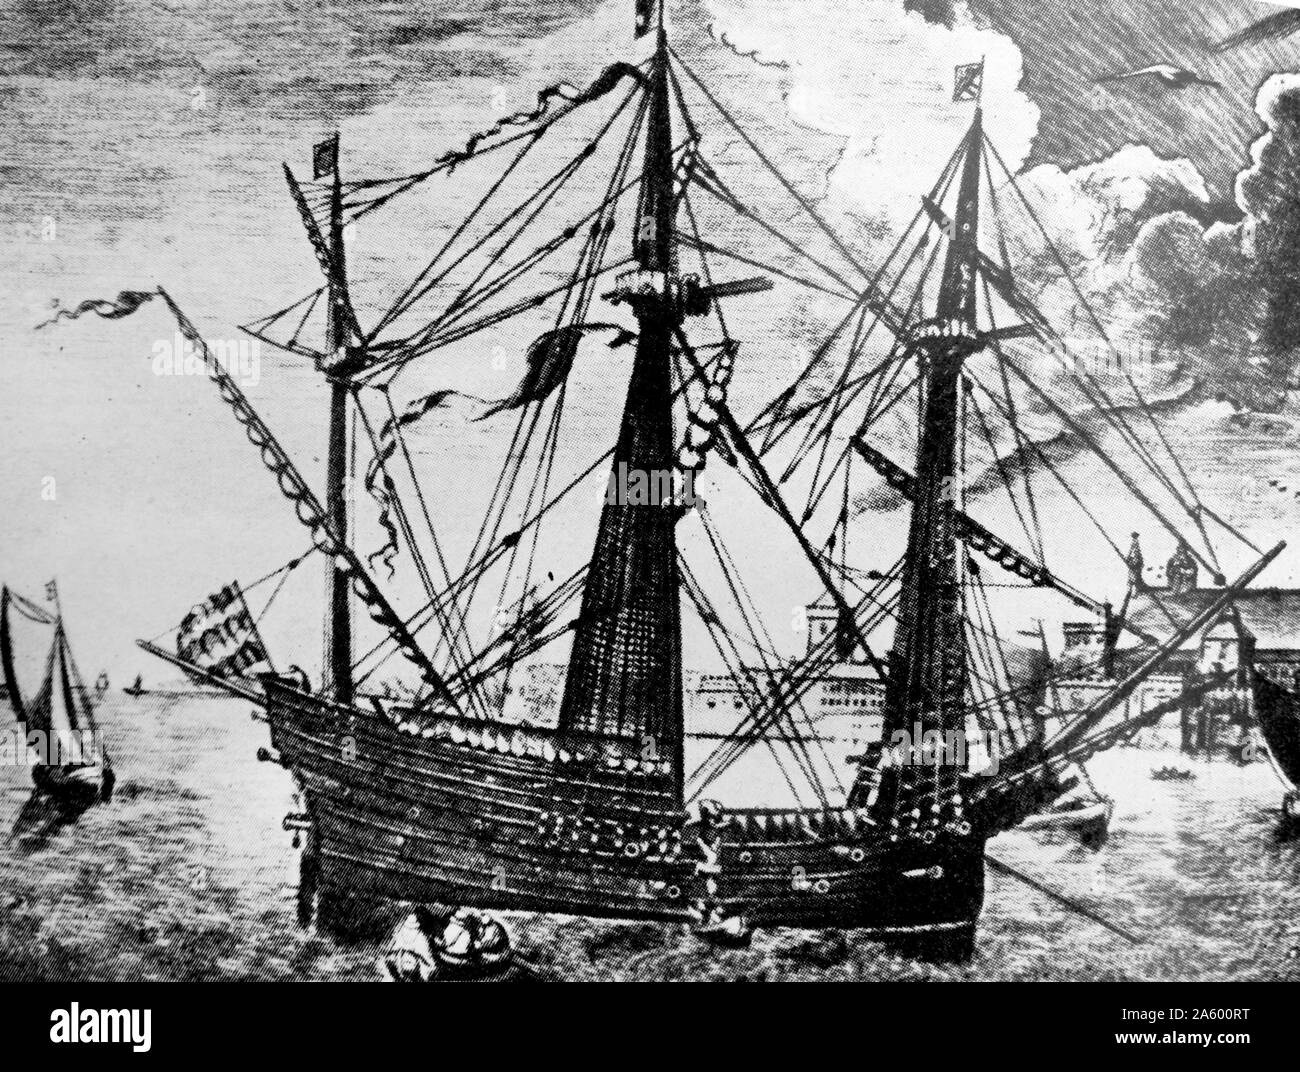 Illustration of the Golden Hind, an English galleon best known for her circumnavigation of the globe between 1577 and 1580, captained by Sir Francis Drake. Dated 16th Century Stock Photo